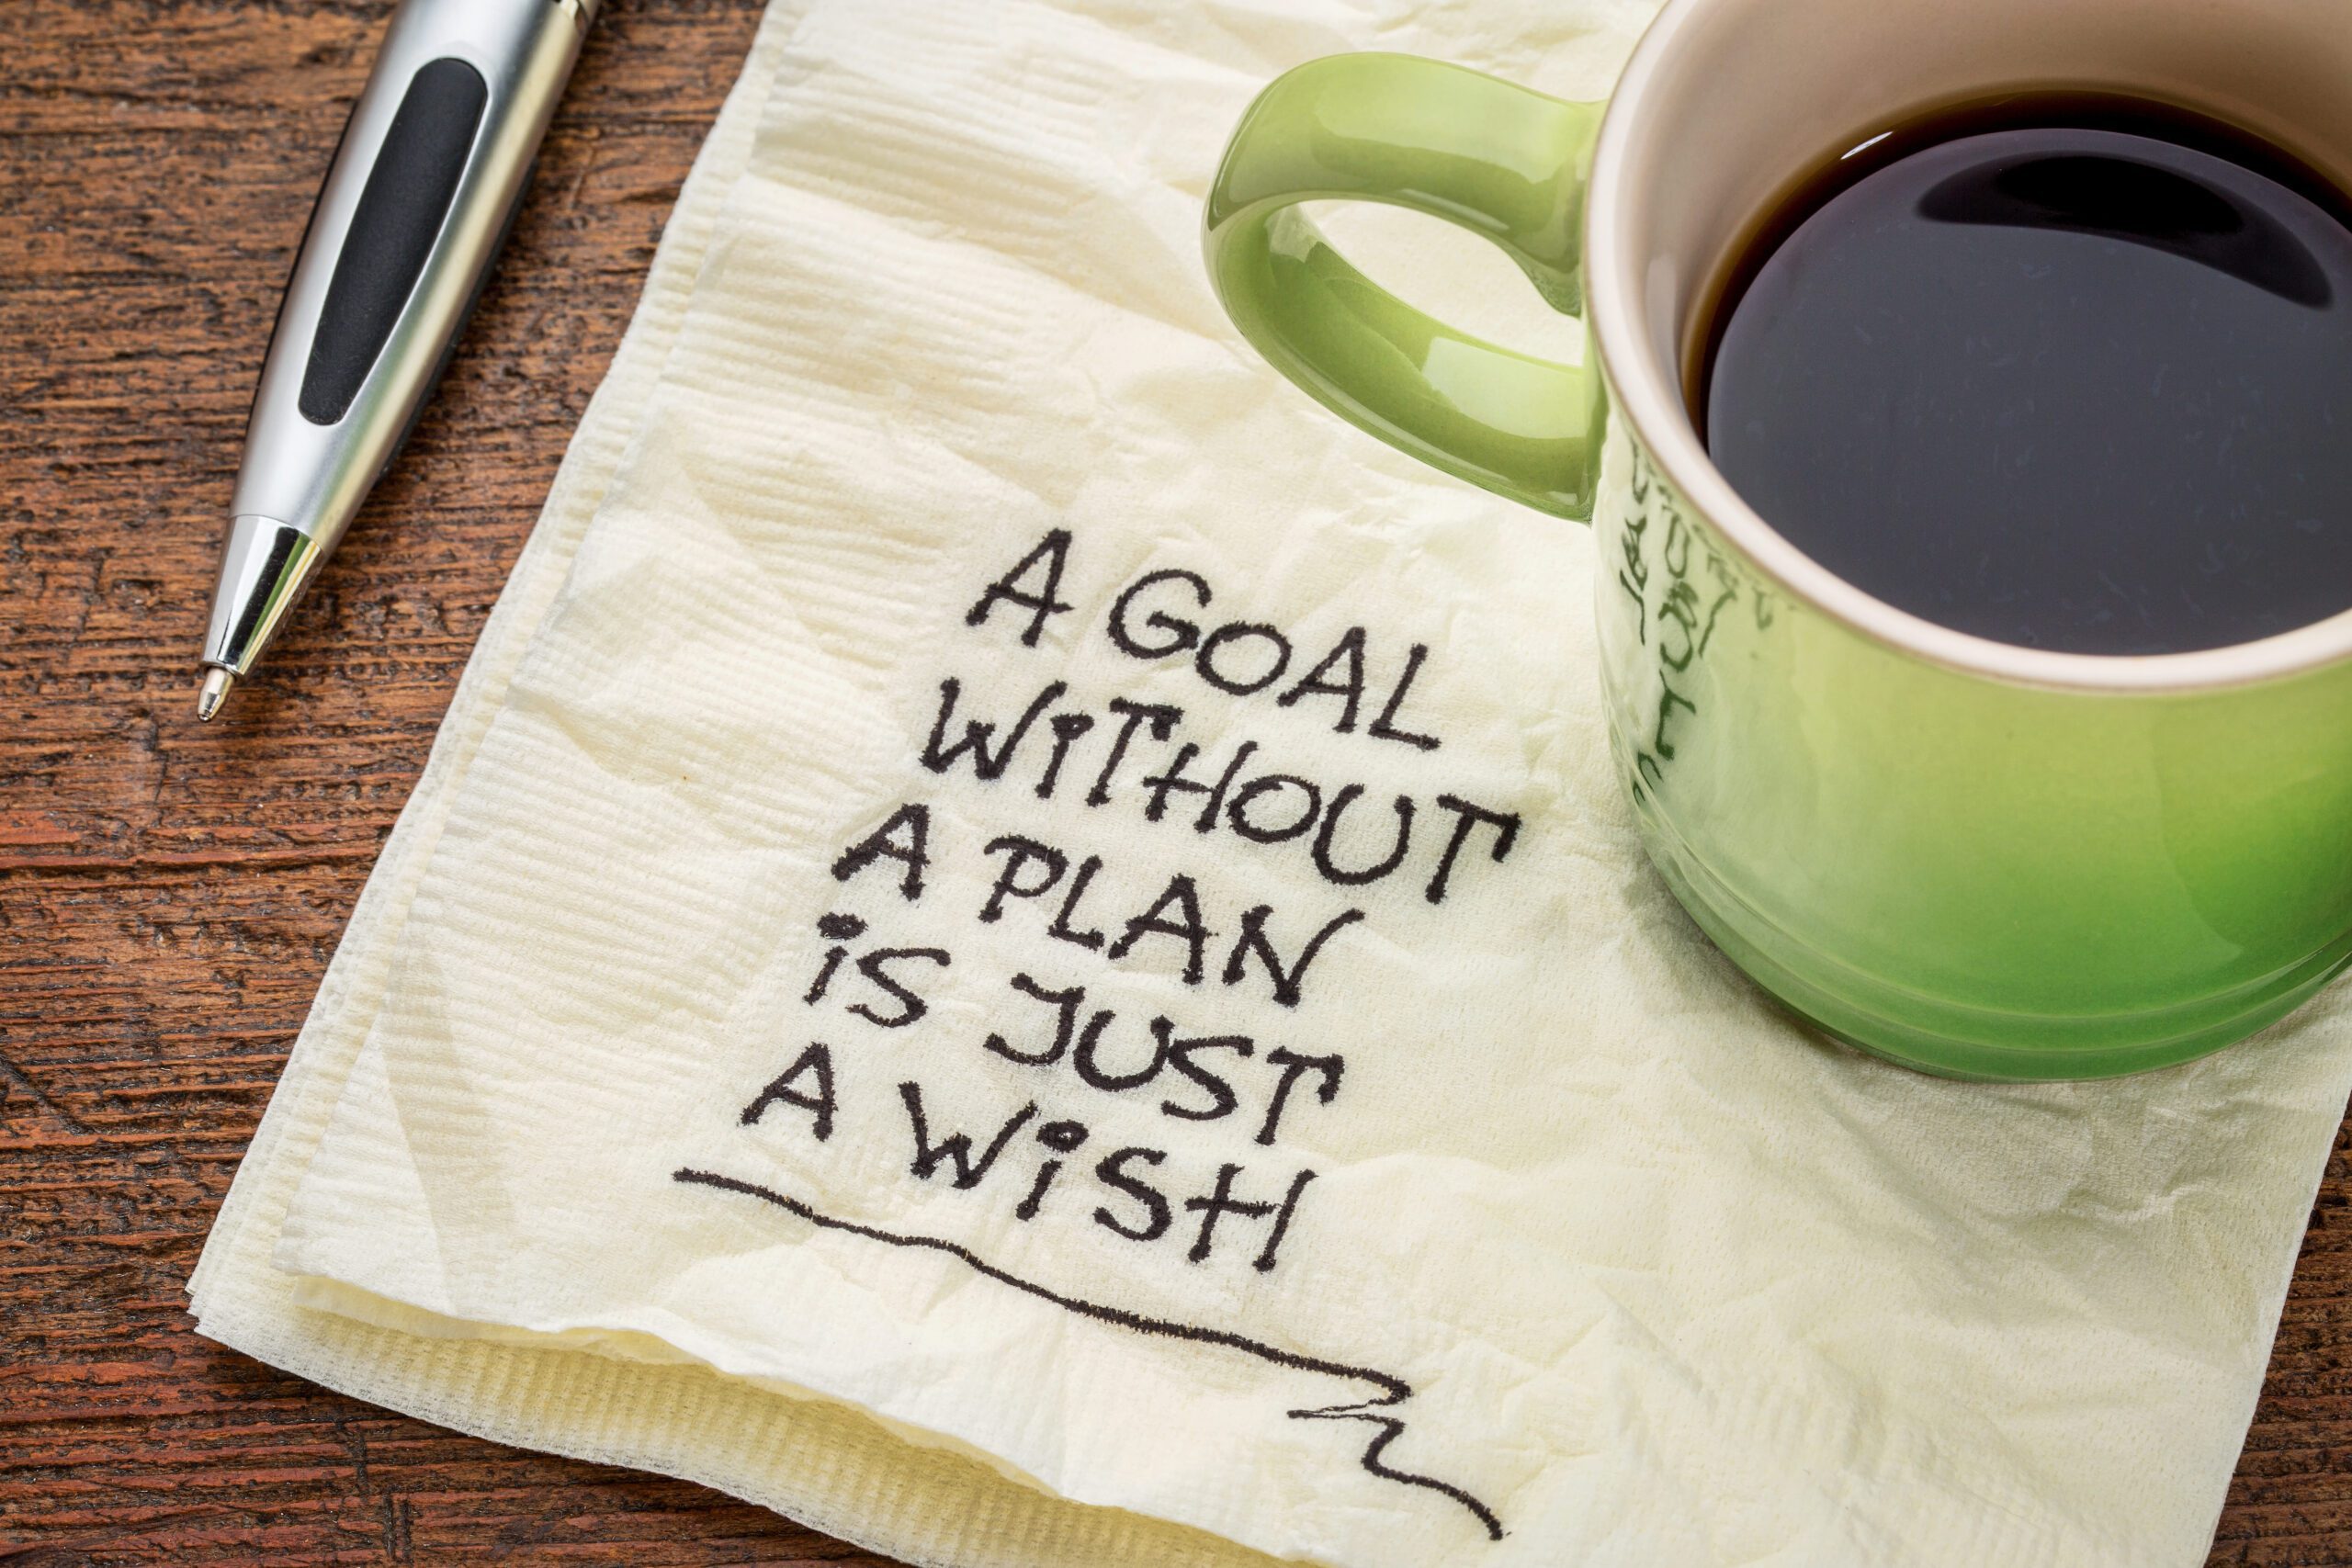 Goals in Recovery provide a reason to get out of your comfort zone, take action, and work towards something meaningful.